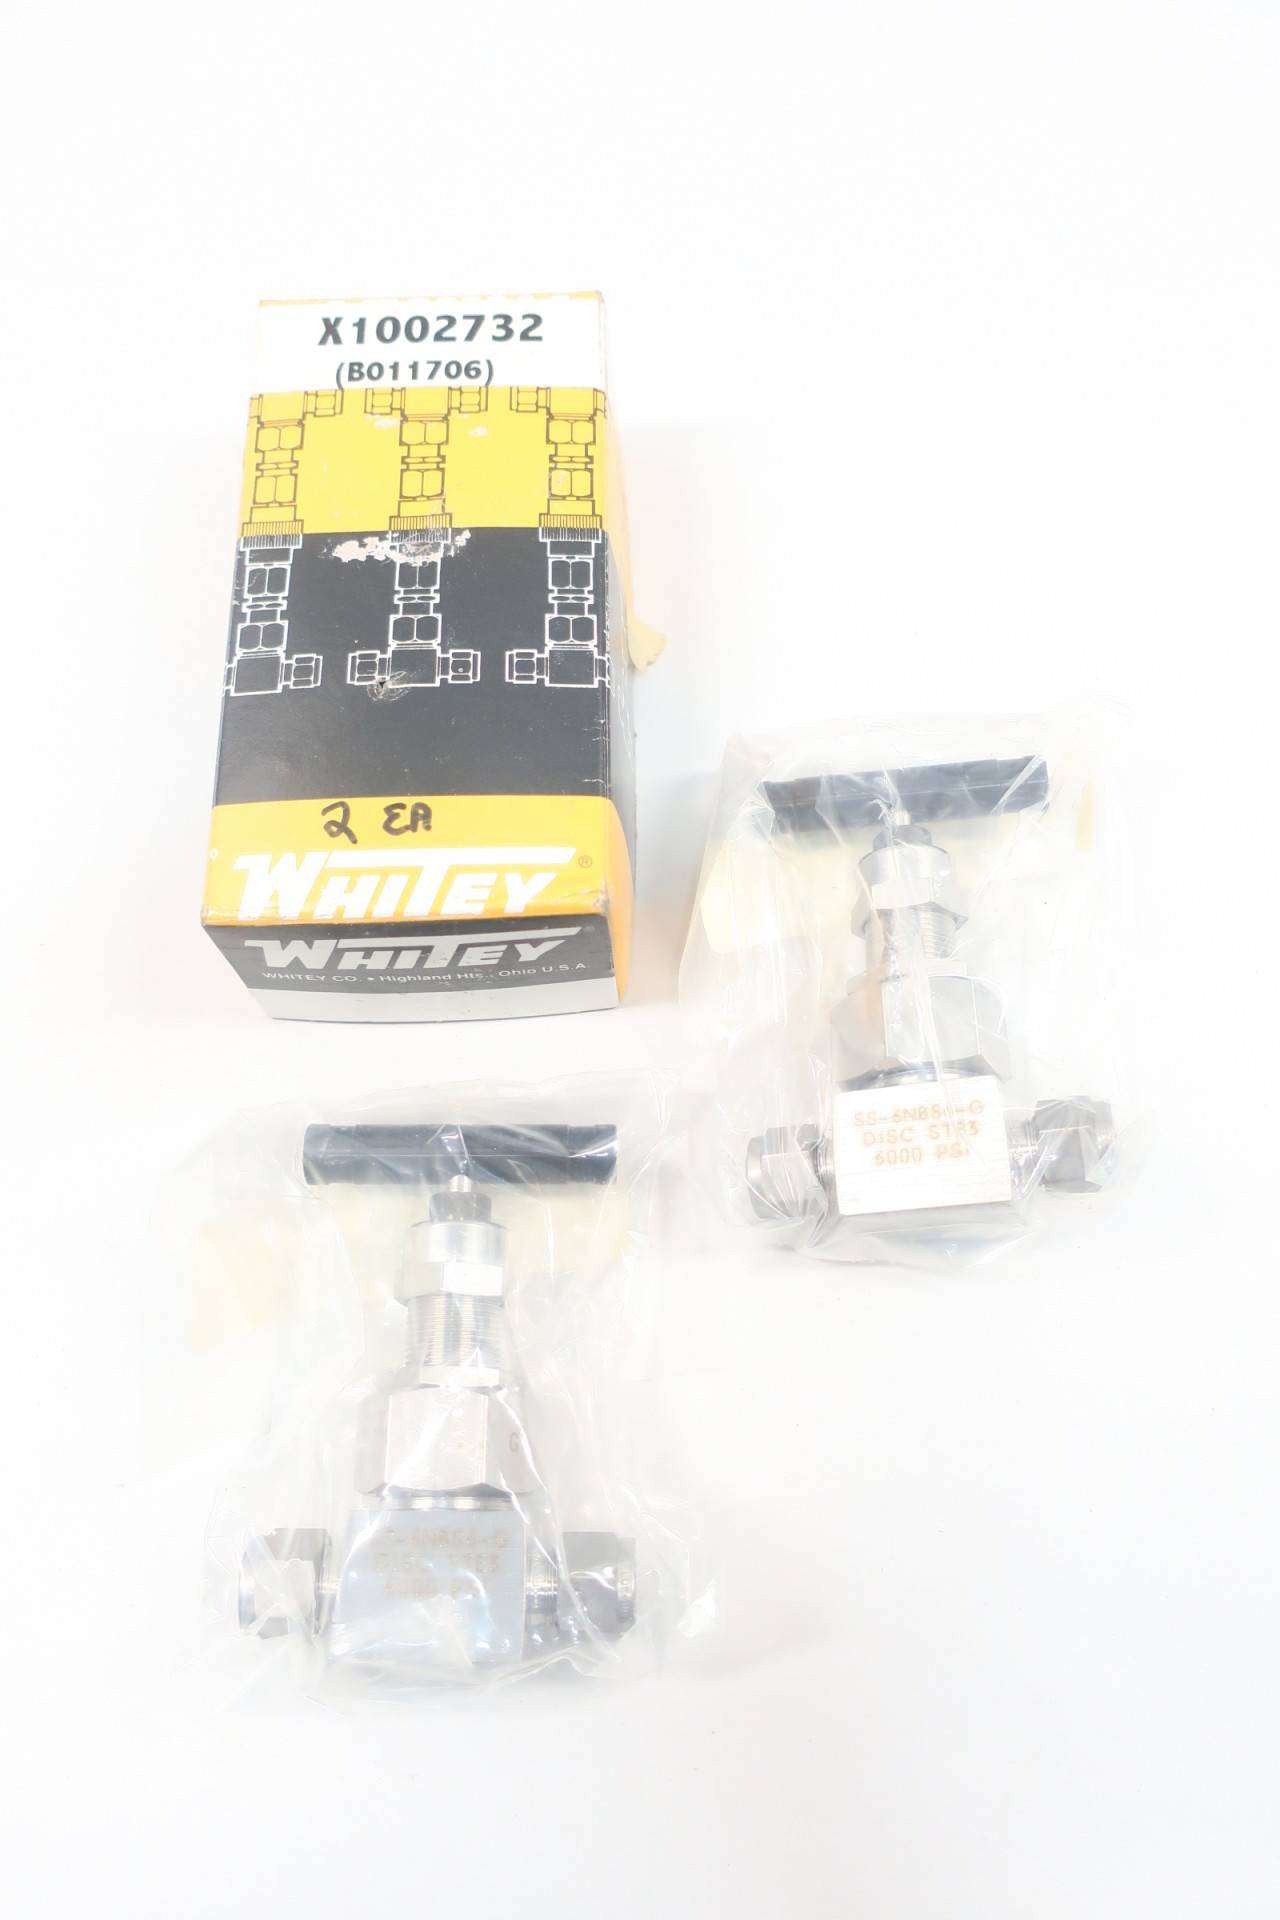 Box of 2 WHITEY SS-6NBS6-G Manual Stainless Needle Valve 6000PSI 3/8IN Tube 